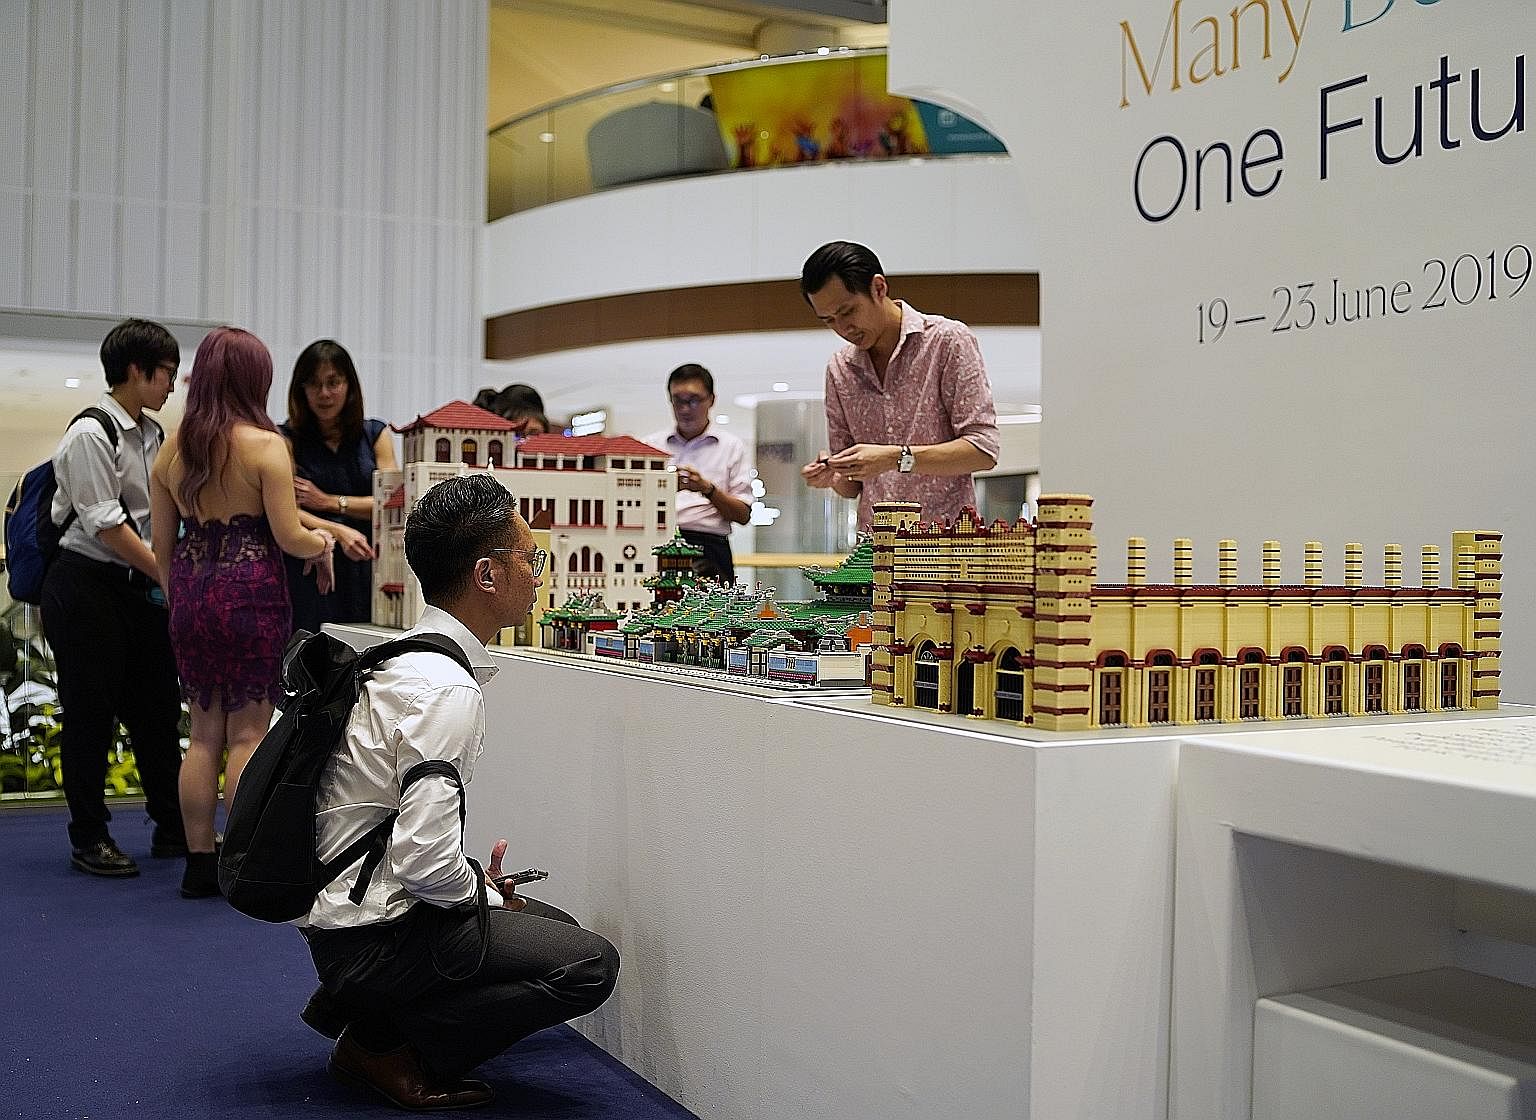 Visitors to an exhibition looking at replicas of religious monuments located in Telok Ayer Street that are built using Lego bricks. The models of the monuments - from far left, Telok Ayer Chinese Methodist Church, Thian Hock Keng Temple and Nagore Da